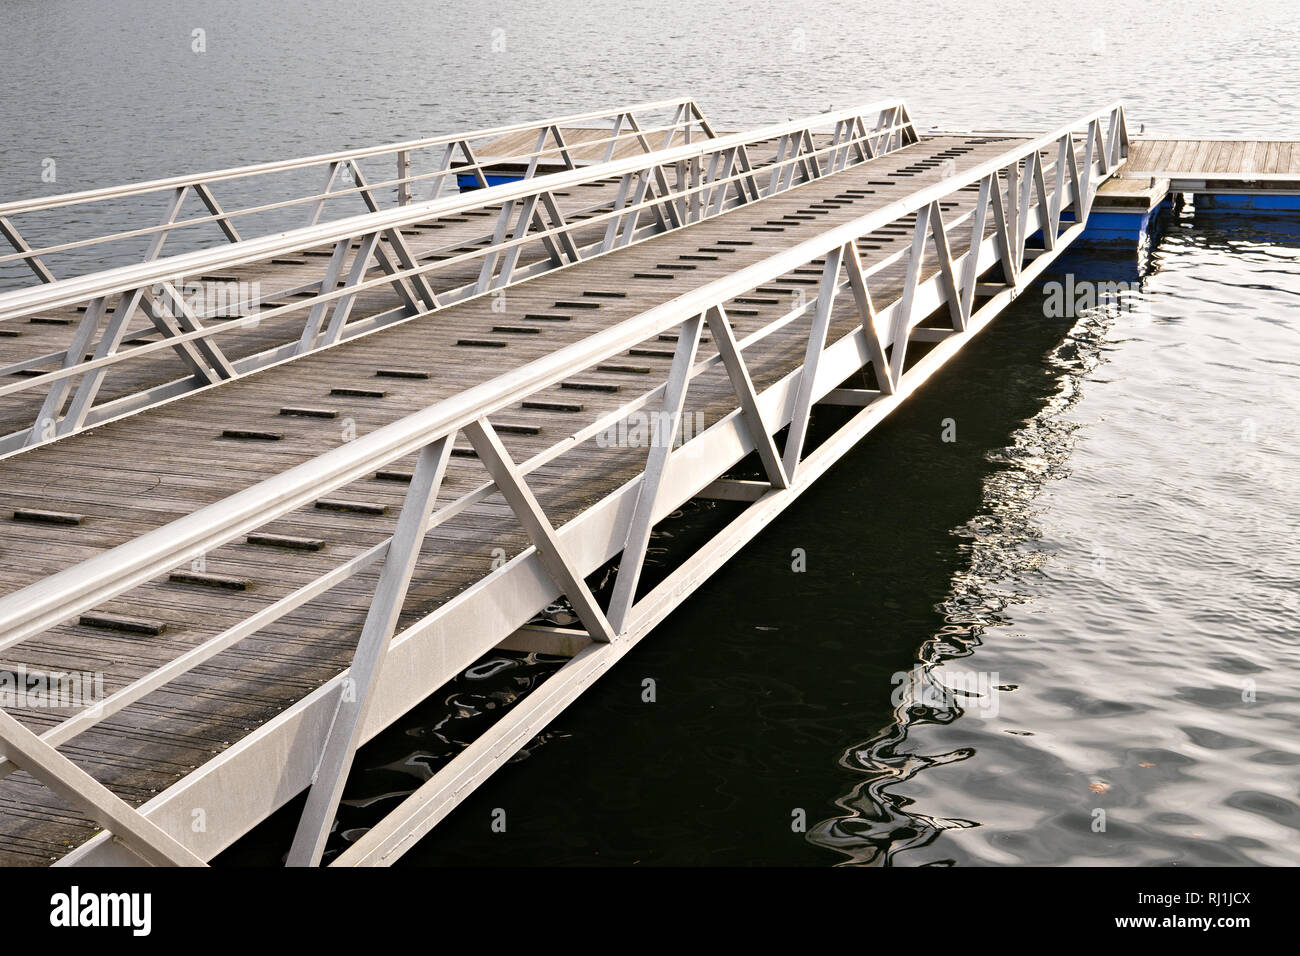 Modern wooden jetty or pier with metal sides without people or boats. Boat  ramp and pier Stock Photo - Alamy